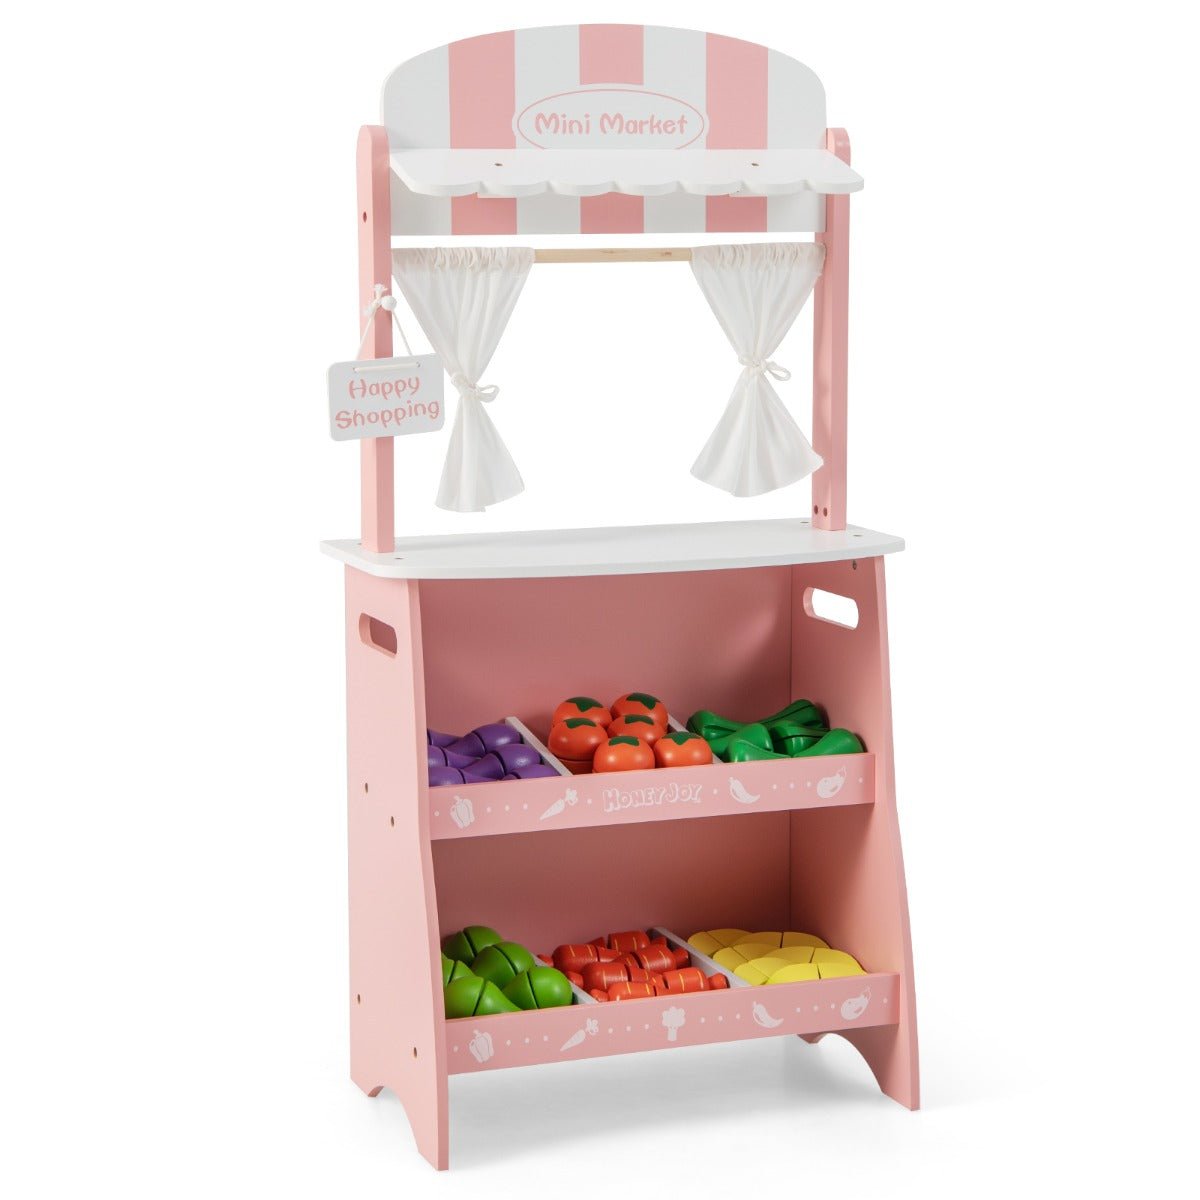 Shop and Play with Our Kids' Wooden Grocery Store Set